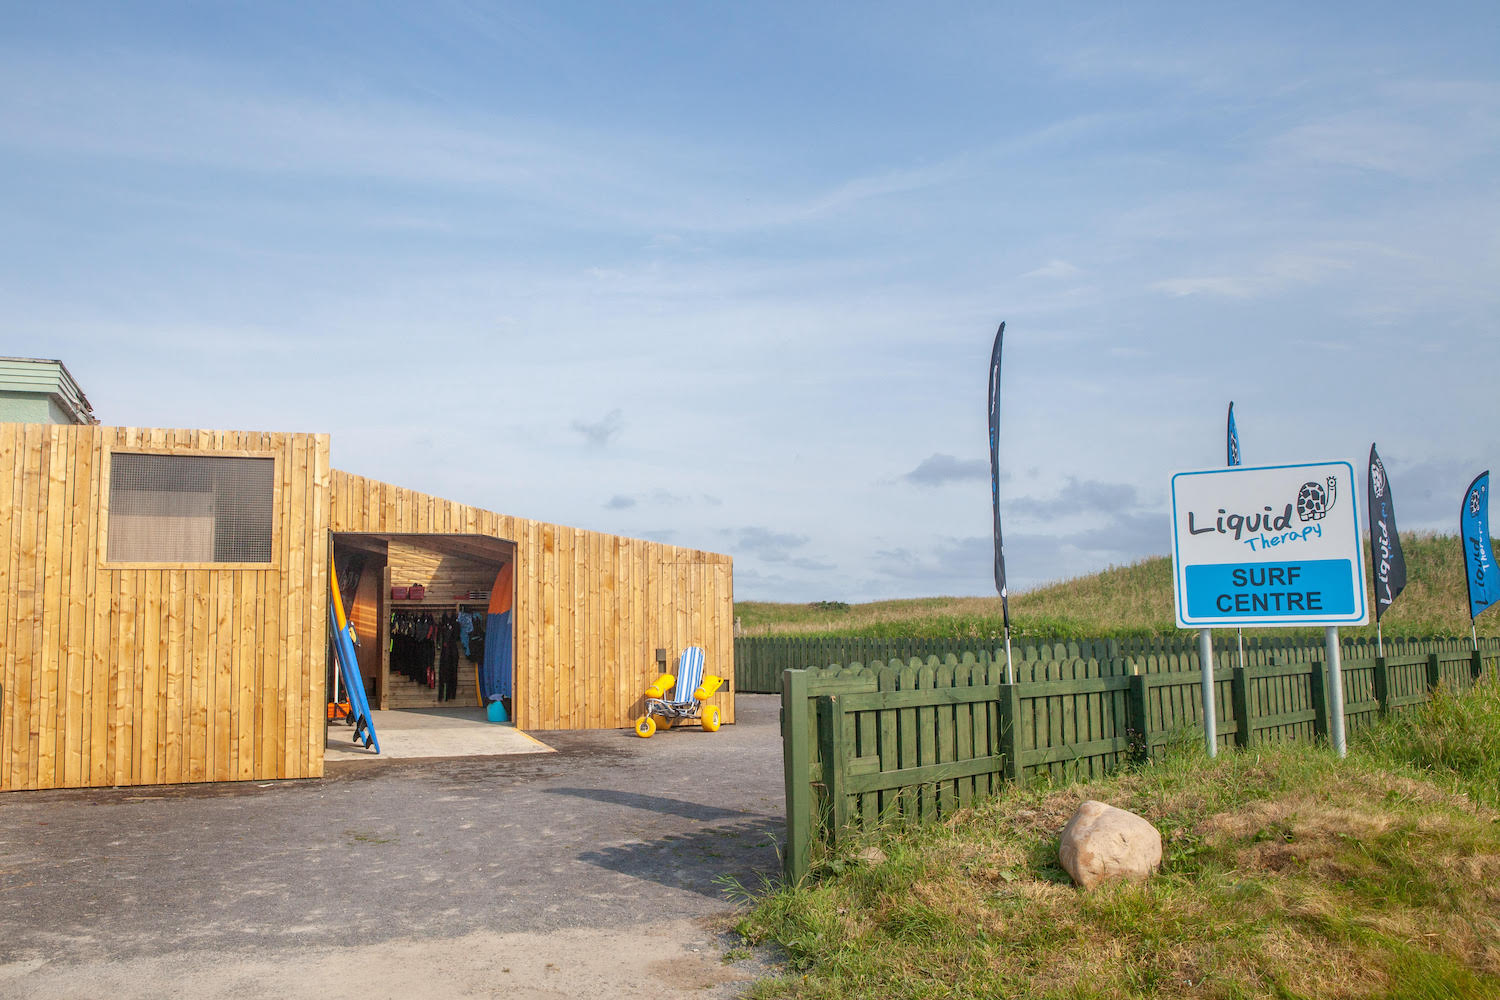 Liquid Therapy Surf Centre in Rossnowlagh, Co. Donegal